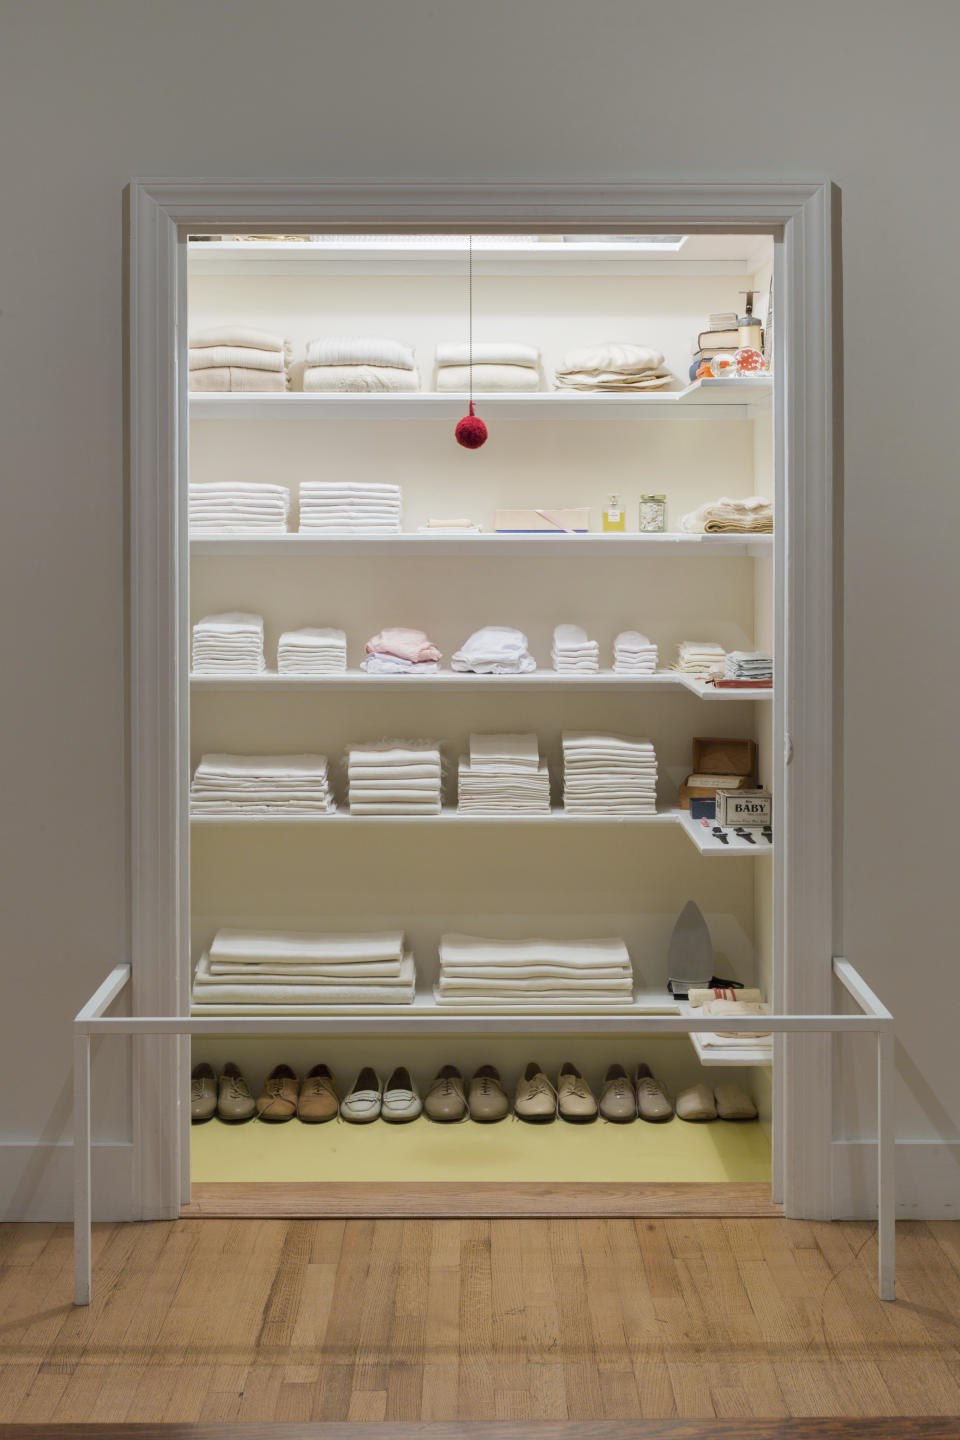 This 2017 photo provided by The Metropolitan Museum of Art shows an installation view of "Sara Berman's Closet." The exhibit runs through Sept. 5, 2017 at the museum in New York. (The Metropolitan Museum of Art via AP)